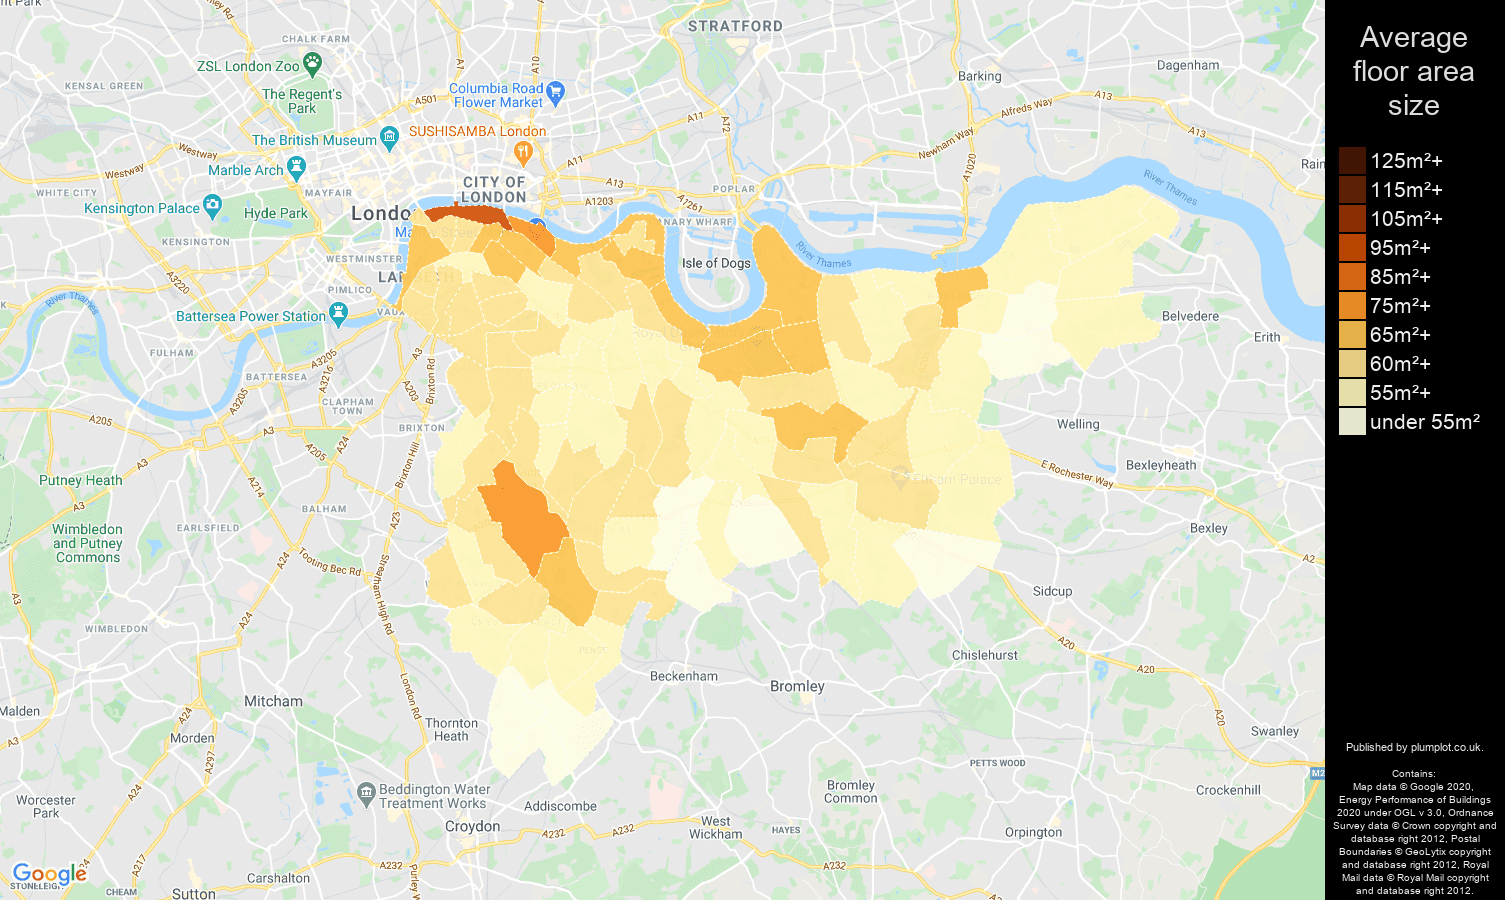 South East London map of average floor area size of flats